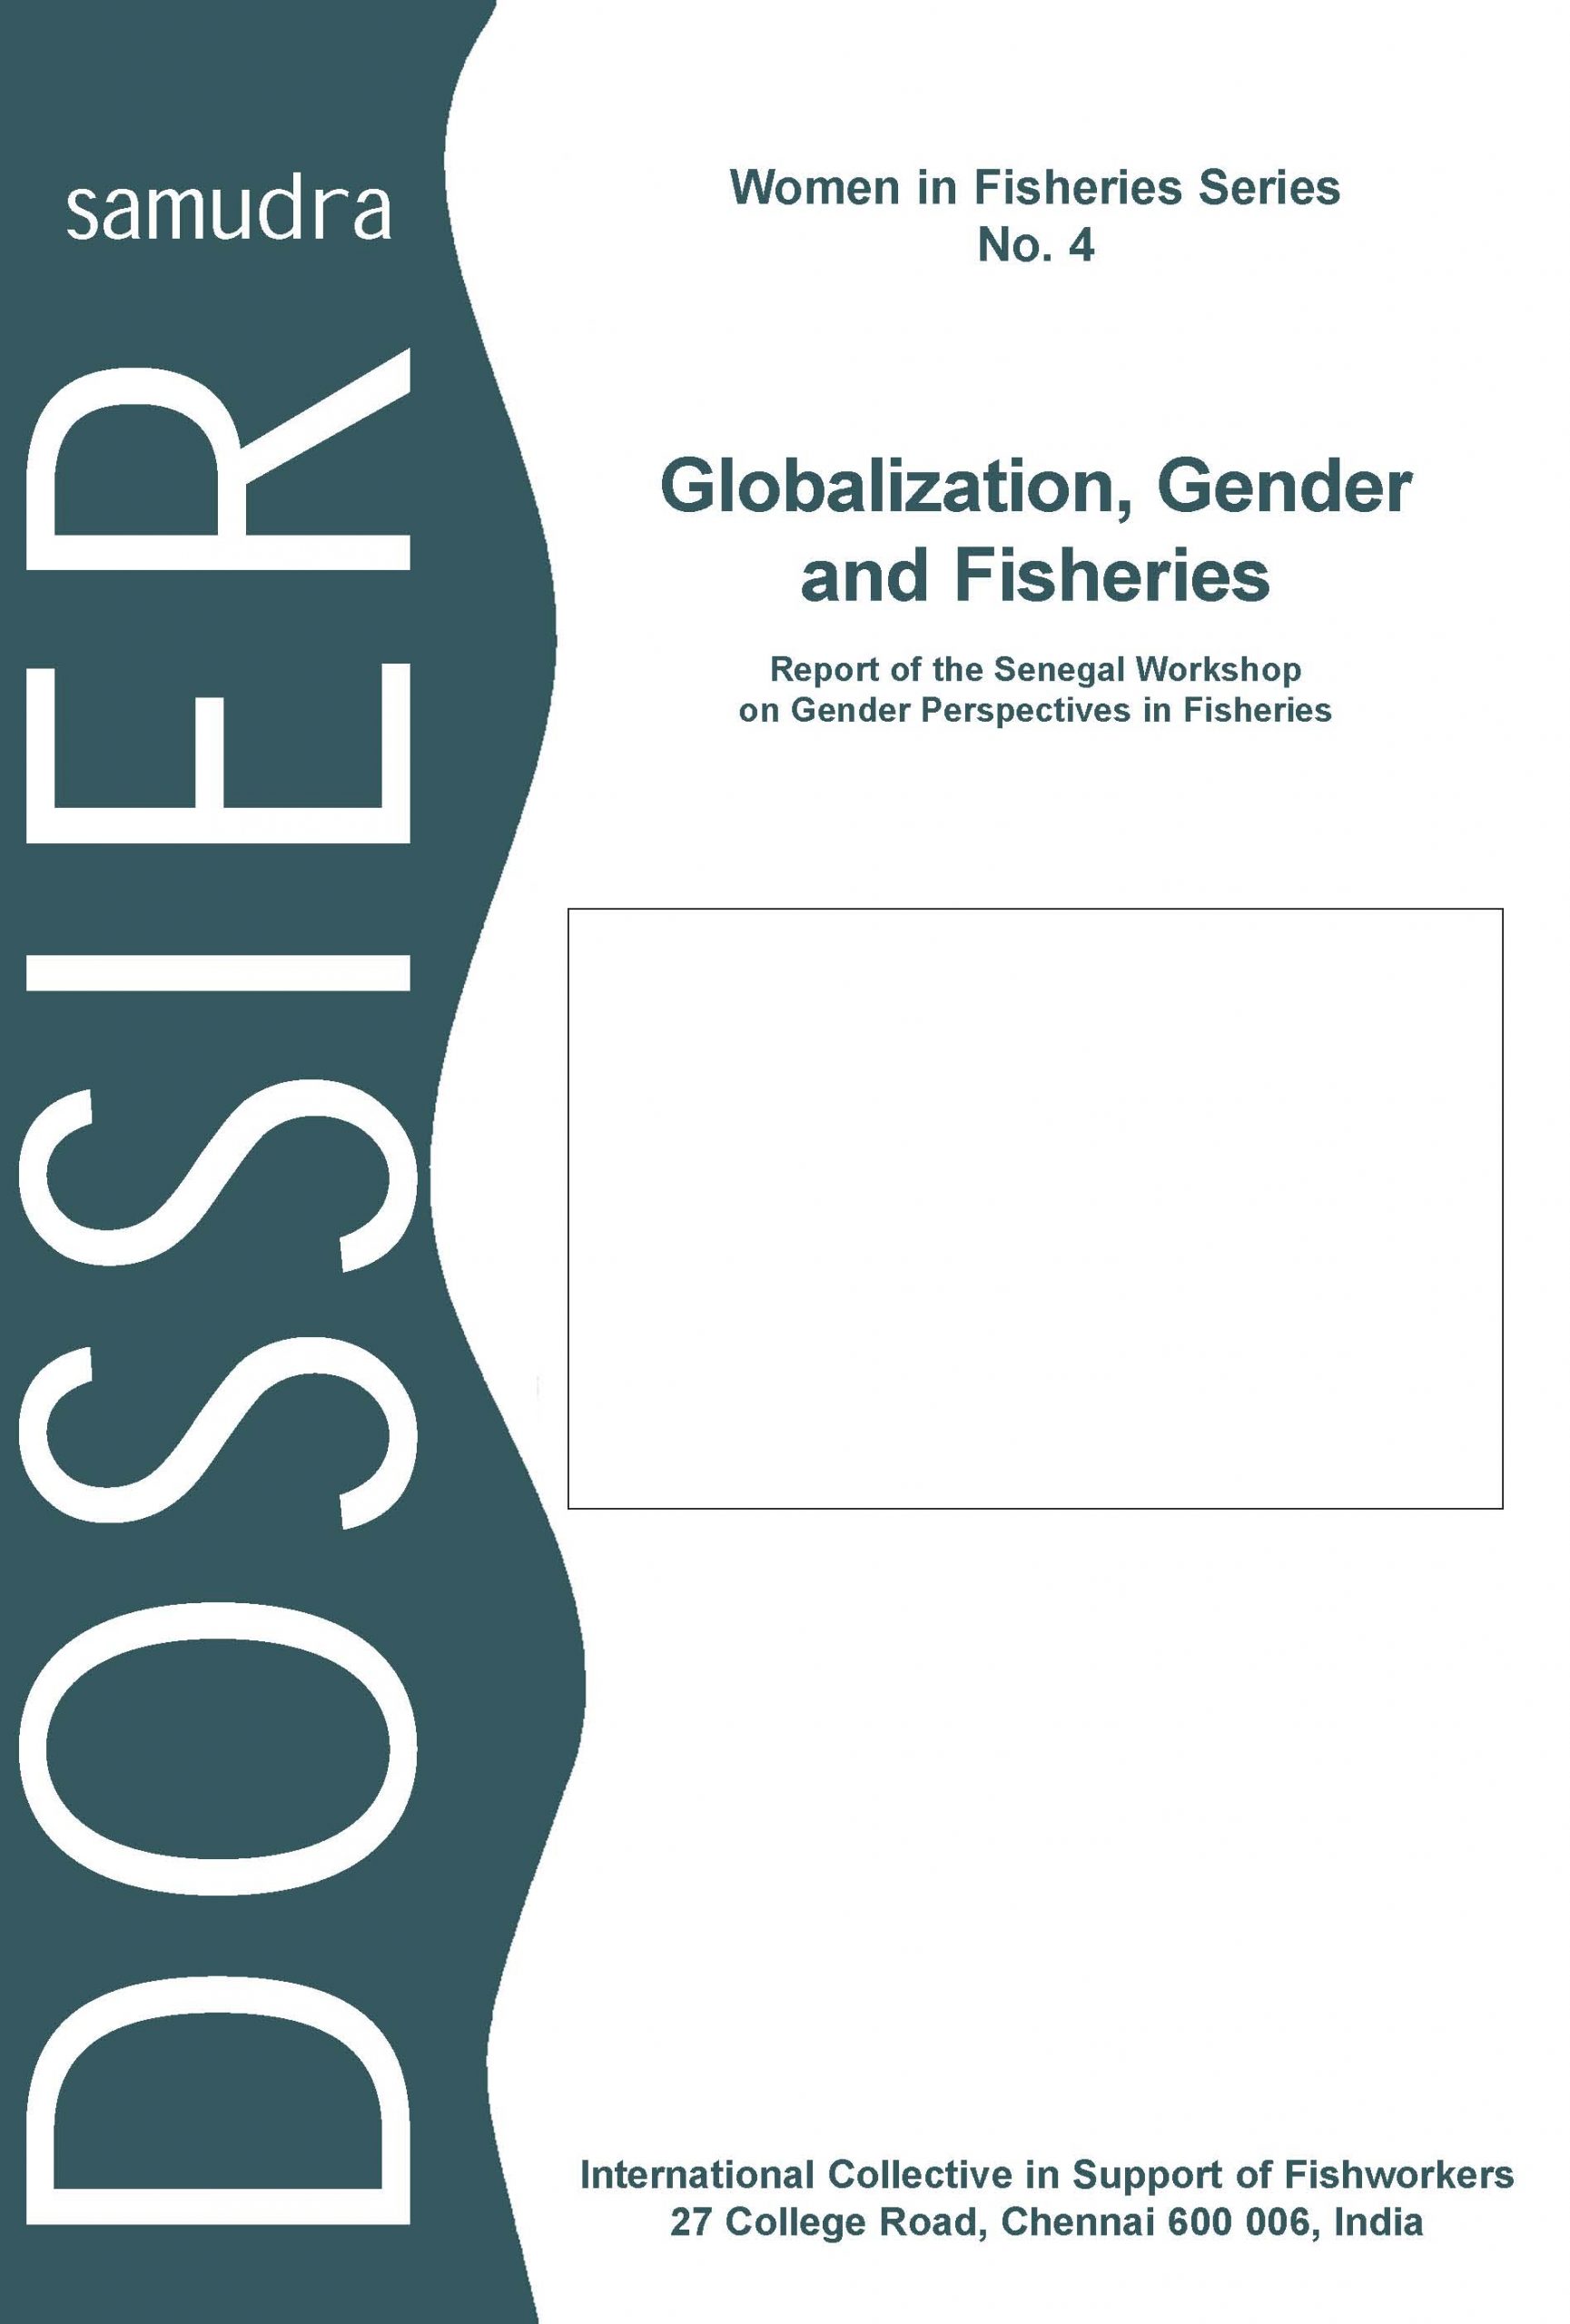 Globalization, Gender and Fisheries: Report of the Senegal Workshop on Gender Perspectives in Fisheries – Women in Fisheries No. 4